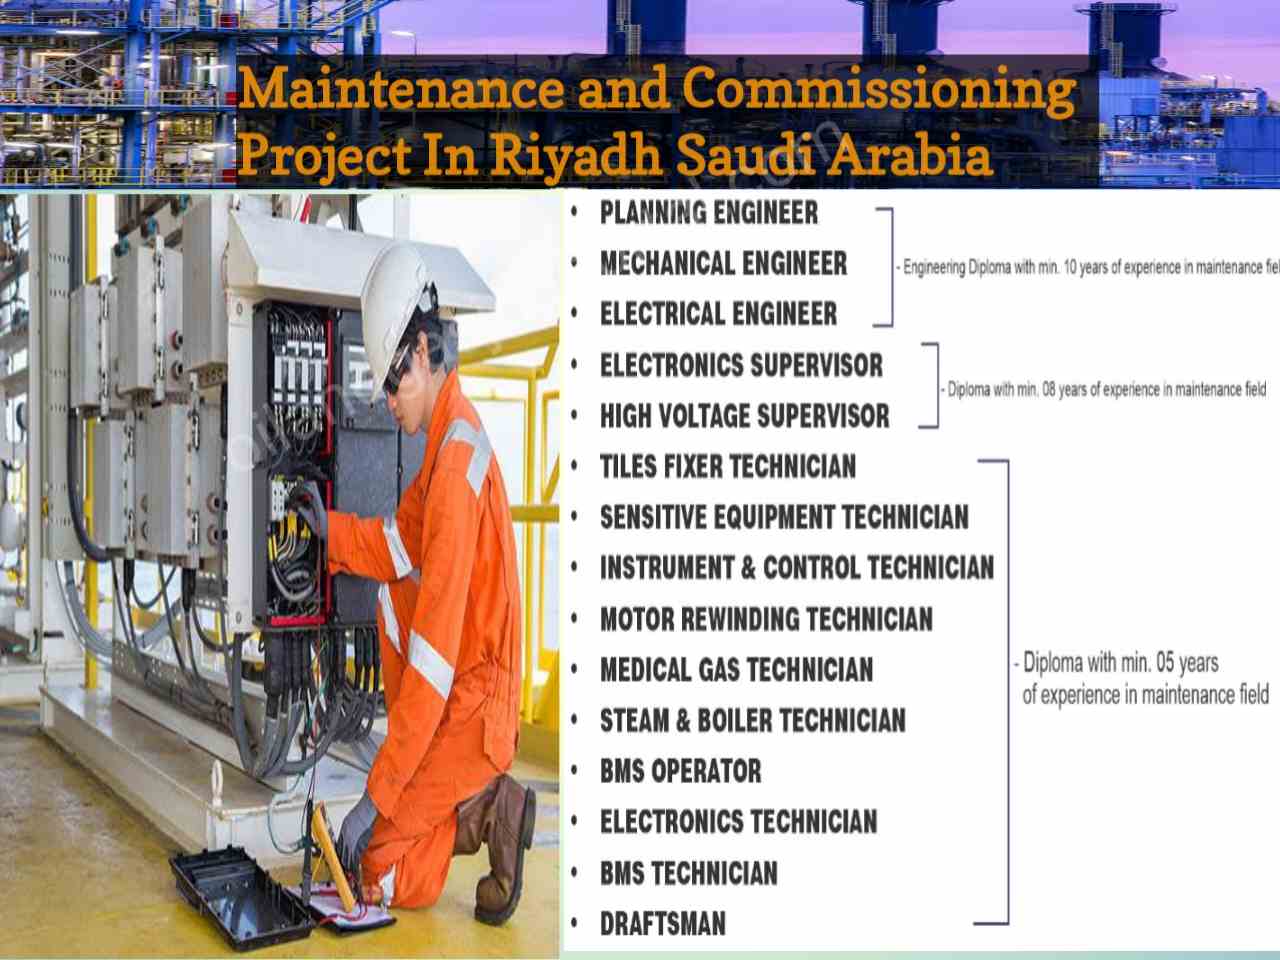 Urgently Required For Operation Maintenance and Commissioning Project In Riyadh Saudi Arabia